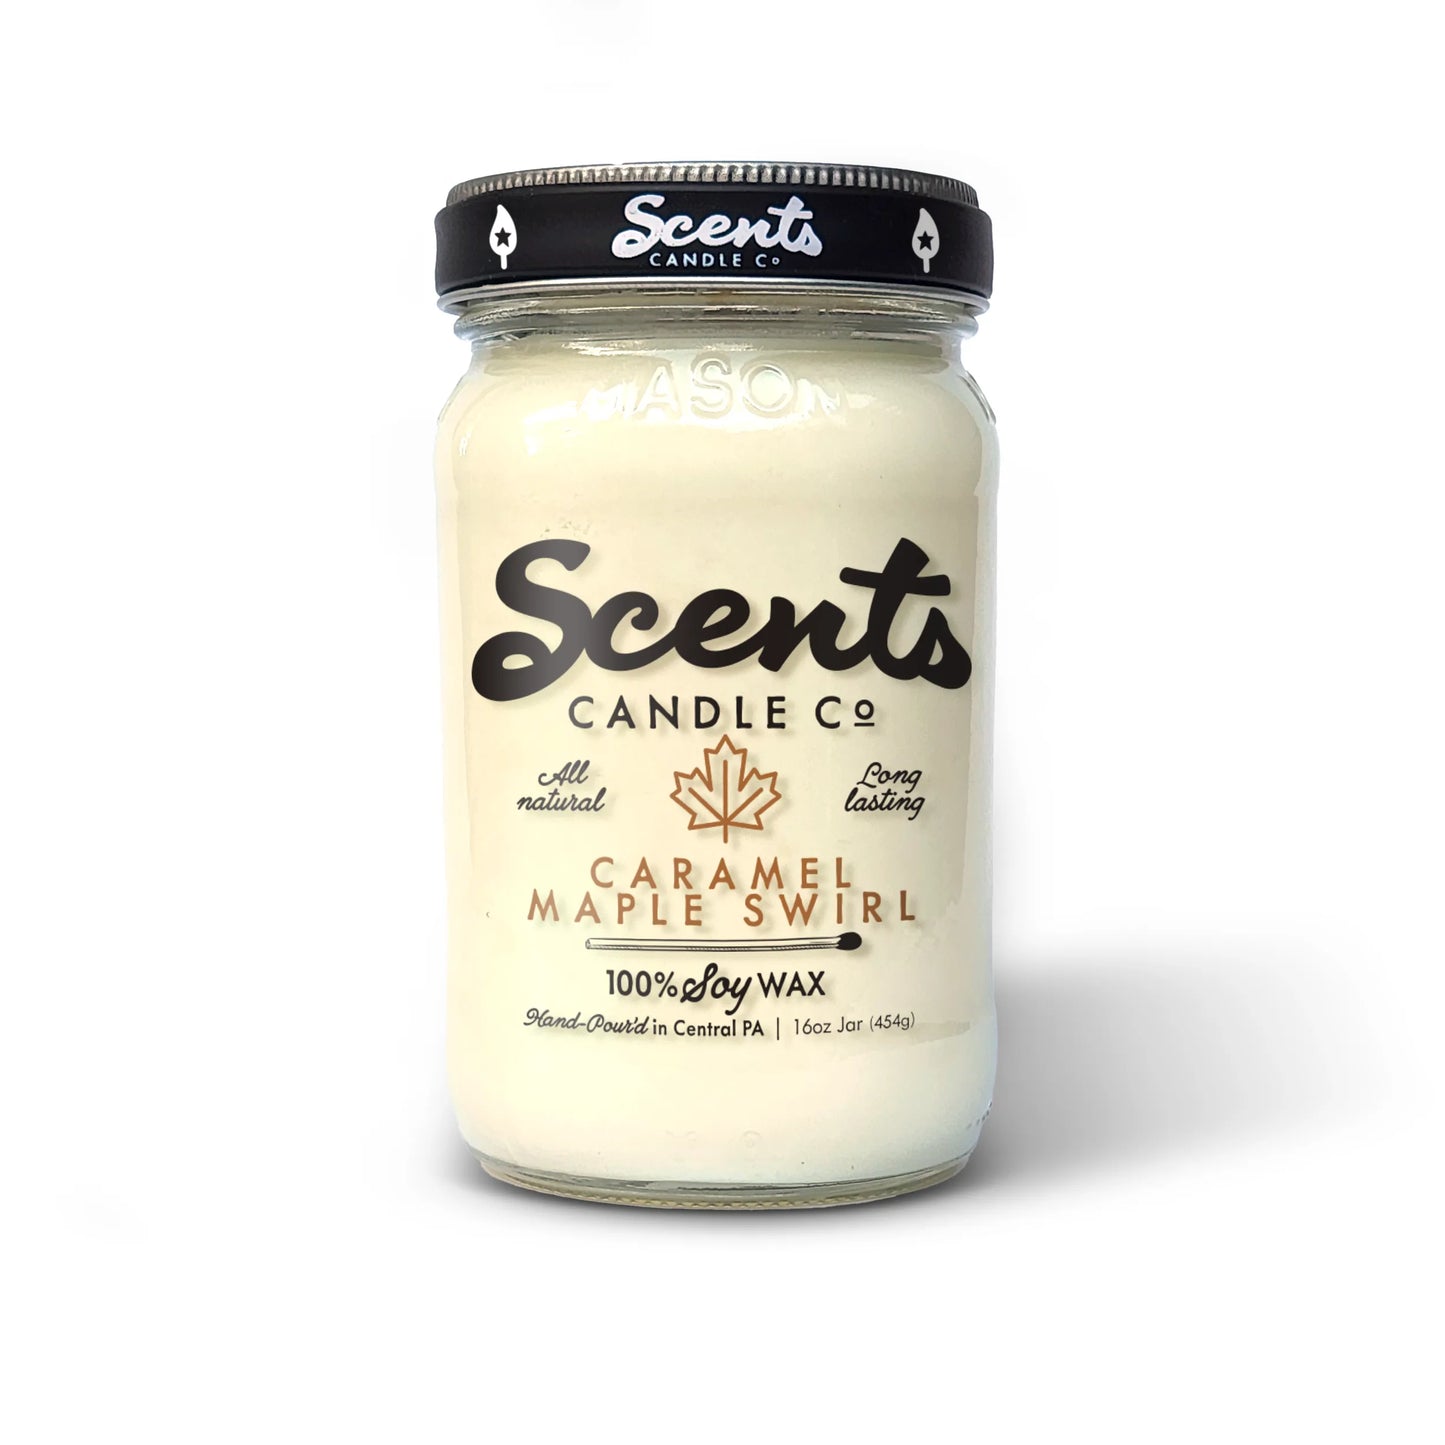 Scents Candle Co. Caramel Maple Swirl Soy Wax Candles